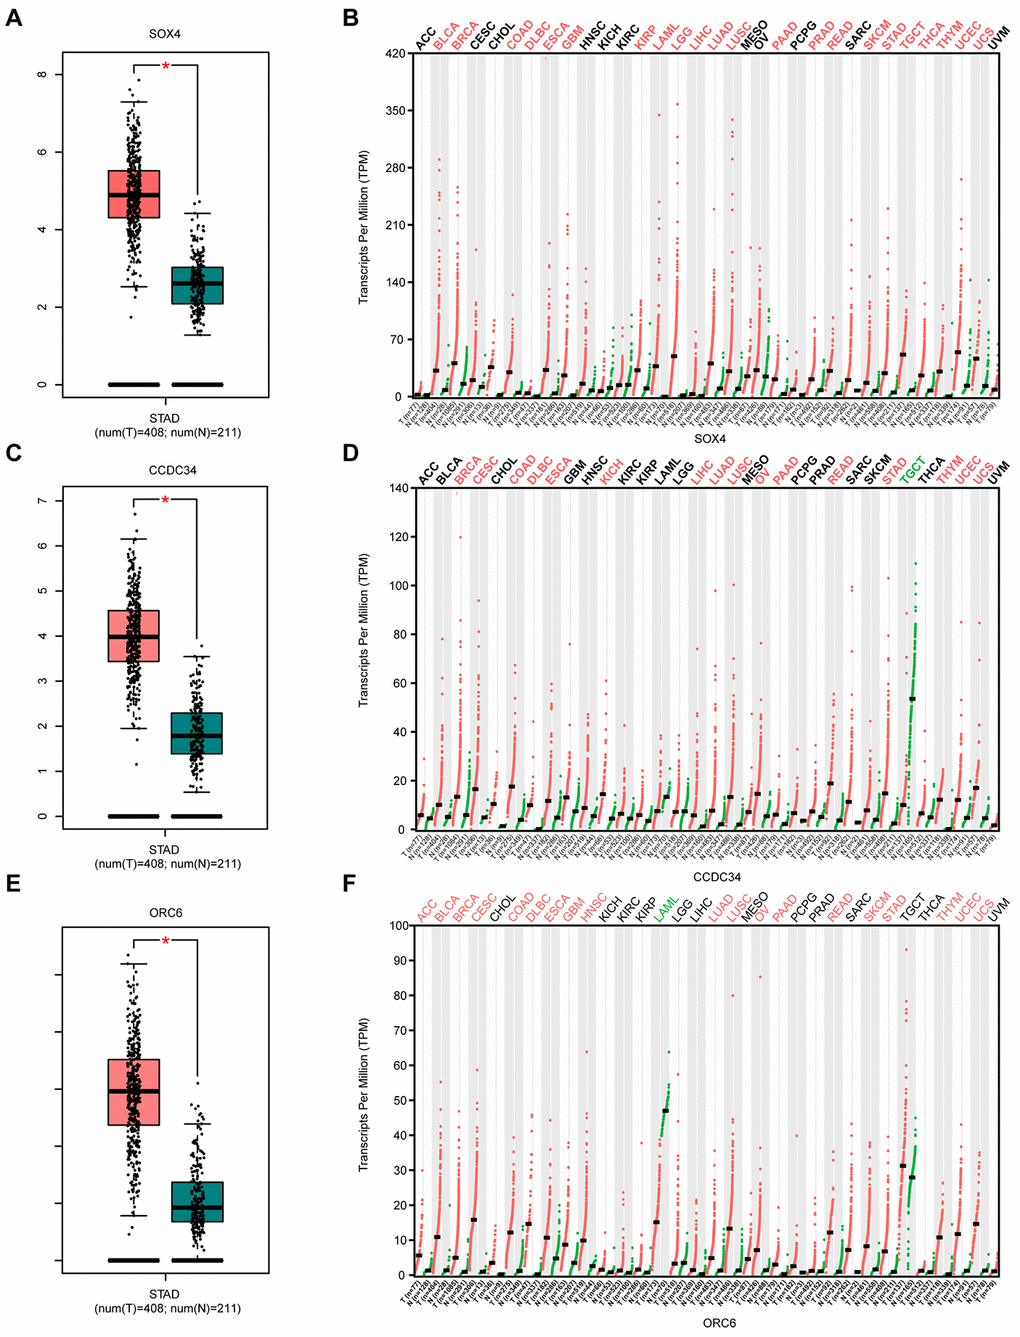 Analysis of 3 survival-related mRNAs in the GEPIA2 database. (A) Box plot of SOX4 expression in GA and normal gastric tissues. Red represents tumor tissue, while green represents normal tissue. (B) Dot diagram of SOX4 expression in various cancer tissues and corresponding normal tissues. Red indicates high expression, while green indicates low expression (C). Box plot of CCDC34 expression in GA and normal gastric tissues. (D) Dot diagram of CCDC34 expression in various cancer tissues and corresponding normal tissues. (E). Box plot of ORC6 expression in GA and normal gastric tissues. (F) Dot diagram of ORC6 expression in various cancer tissues and corresponding normal tissues. Abbreviations: num, Number; T, Tumor; N, Normal; ACC, Adrenocortical carcinoma; BLCA, Bladder urothelial carcinoma; BRCA, Breast invasive carcinoma; CESC, Cervical squamous cell carcinoma and endocervical adenocarcinoma; CHOL, Cholangiocarcinoma; COAD, Colon adenocarcinoma; DLBC, Diffuse large B-cell lymphoma; ESCA, Esophageal carcinoma; GBM, Glioblastoma multiforme; HNSC, Head and neck squamous cell carcinoma; KICH, Kidney chromophobe; KIRC, Kidney renal clear cell carcinoma; KIRP, Kidney renal papillary cell carcinoma; AML, Acute myeloid leukemia; LGG, Low grade glioma; LIHC, Liver hepatocellular carcinoma; LUAD, Lung adenocarcinoma; LUSC, Lung squamous cell carcinoma; MESO, Mesothelioma; OV, Ovarian serous cystadenocarcinoma; PAAD, Pancreatic adenocarcinoma; PCPG, Pheochromocytoma and paraganglioma; PRAD, Prostate adenocarcinoma; READ, Rectum adenocarcinoma; SARC, Sarcoma; SKCM, Skin Cutaneous Melanoma; STAD, Stomach adenocarcinoma; TGCT, Testicular germ cell tumors; THCA, Thyroid carcinoma; THYM, Thymoma; UCEC, Uterine corpus endometrial carcinoma; UCS, Uterine carcinosarcoma; UVM, Uveal melanoma.